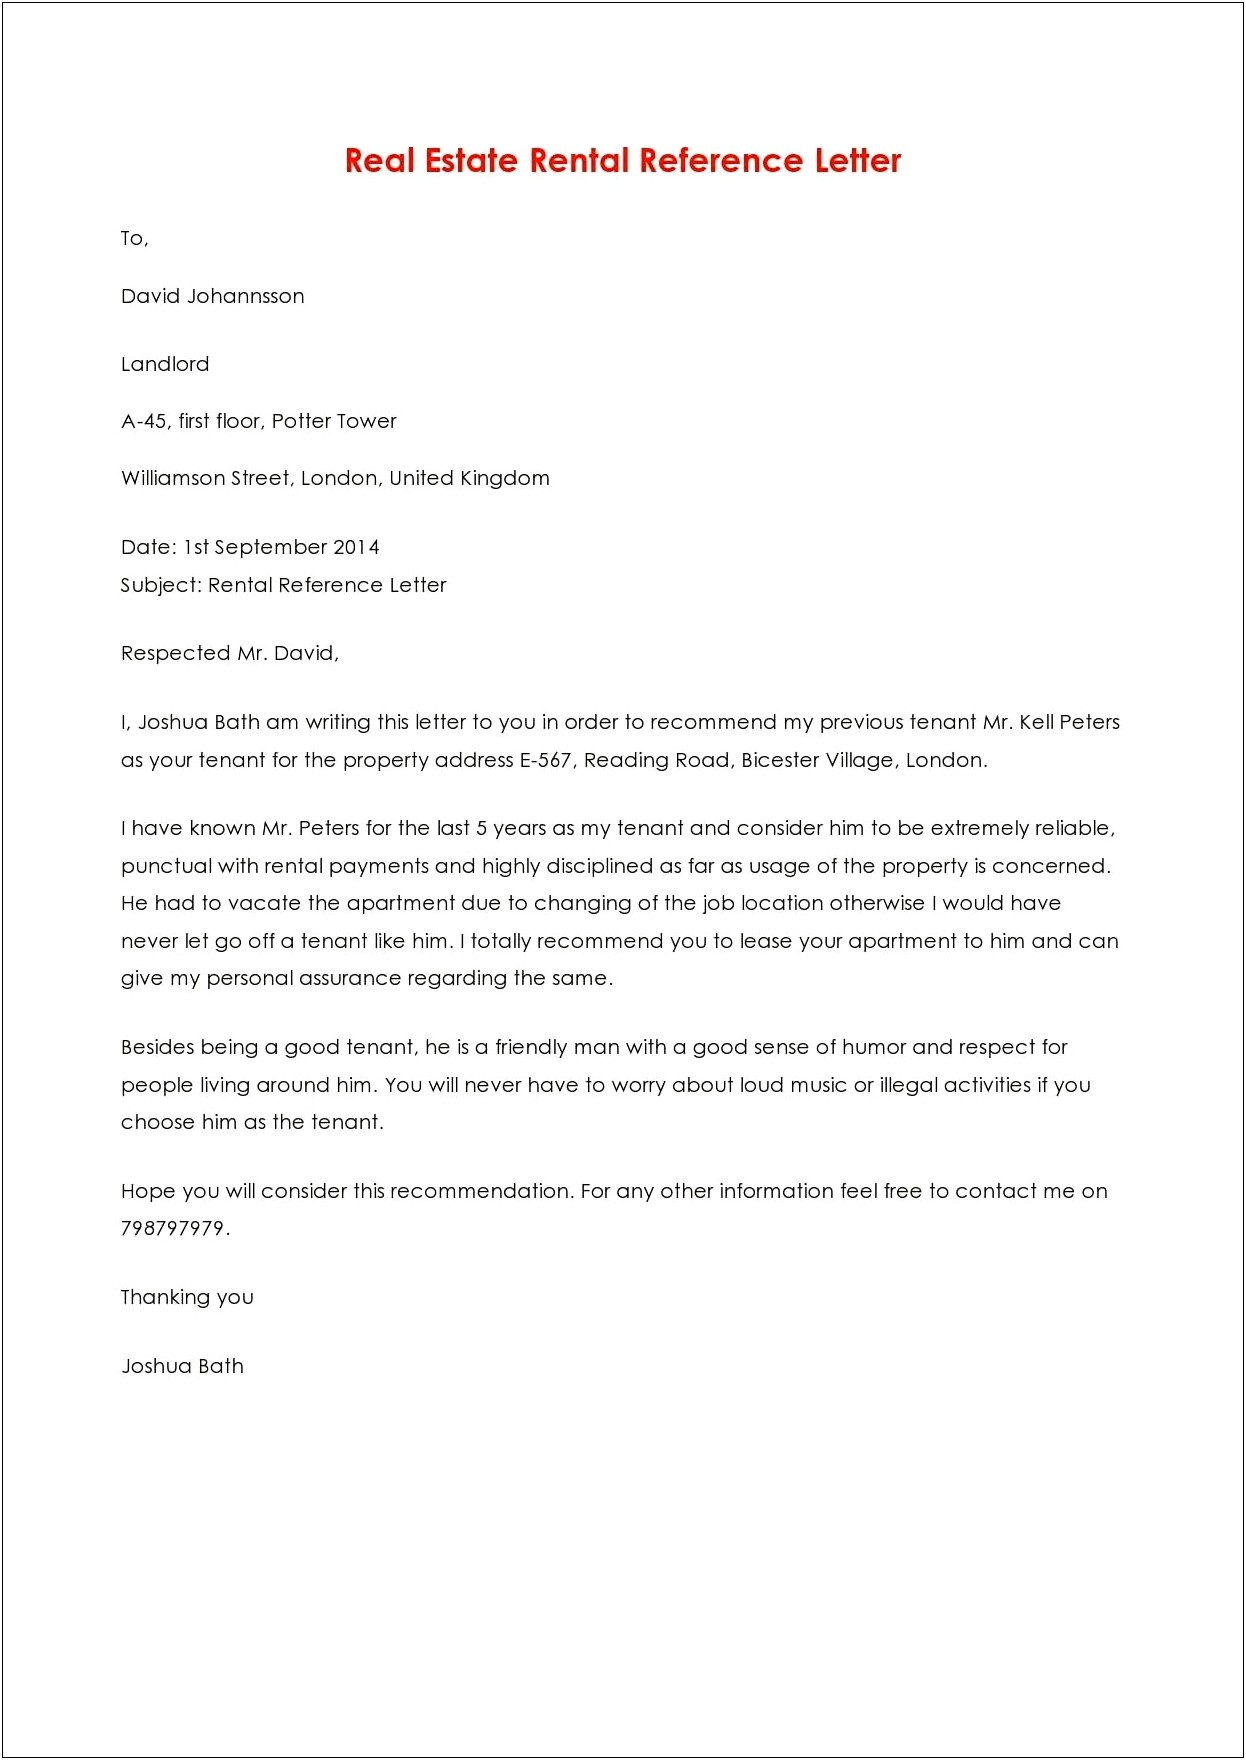 Template Free Letter From Renter To Landldord